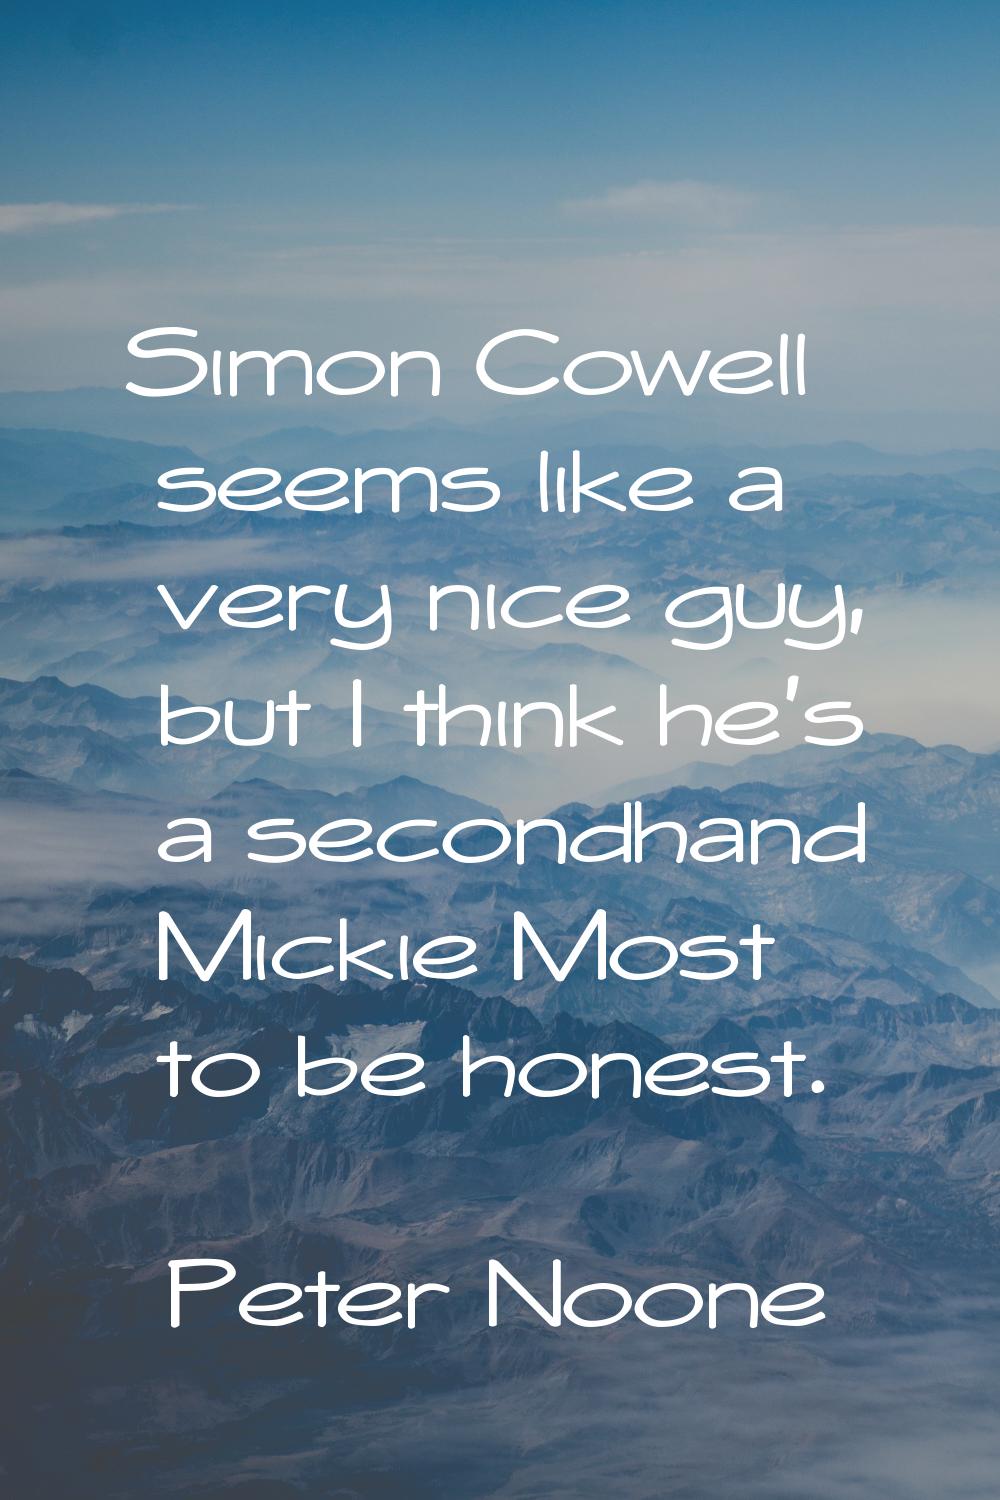 Simon Cowell seems like a very nice guy, but I think he's a secondhand Mickie Most to be honest.